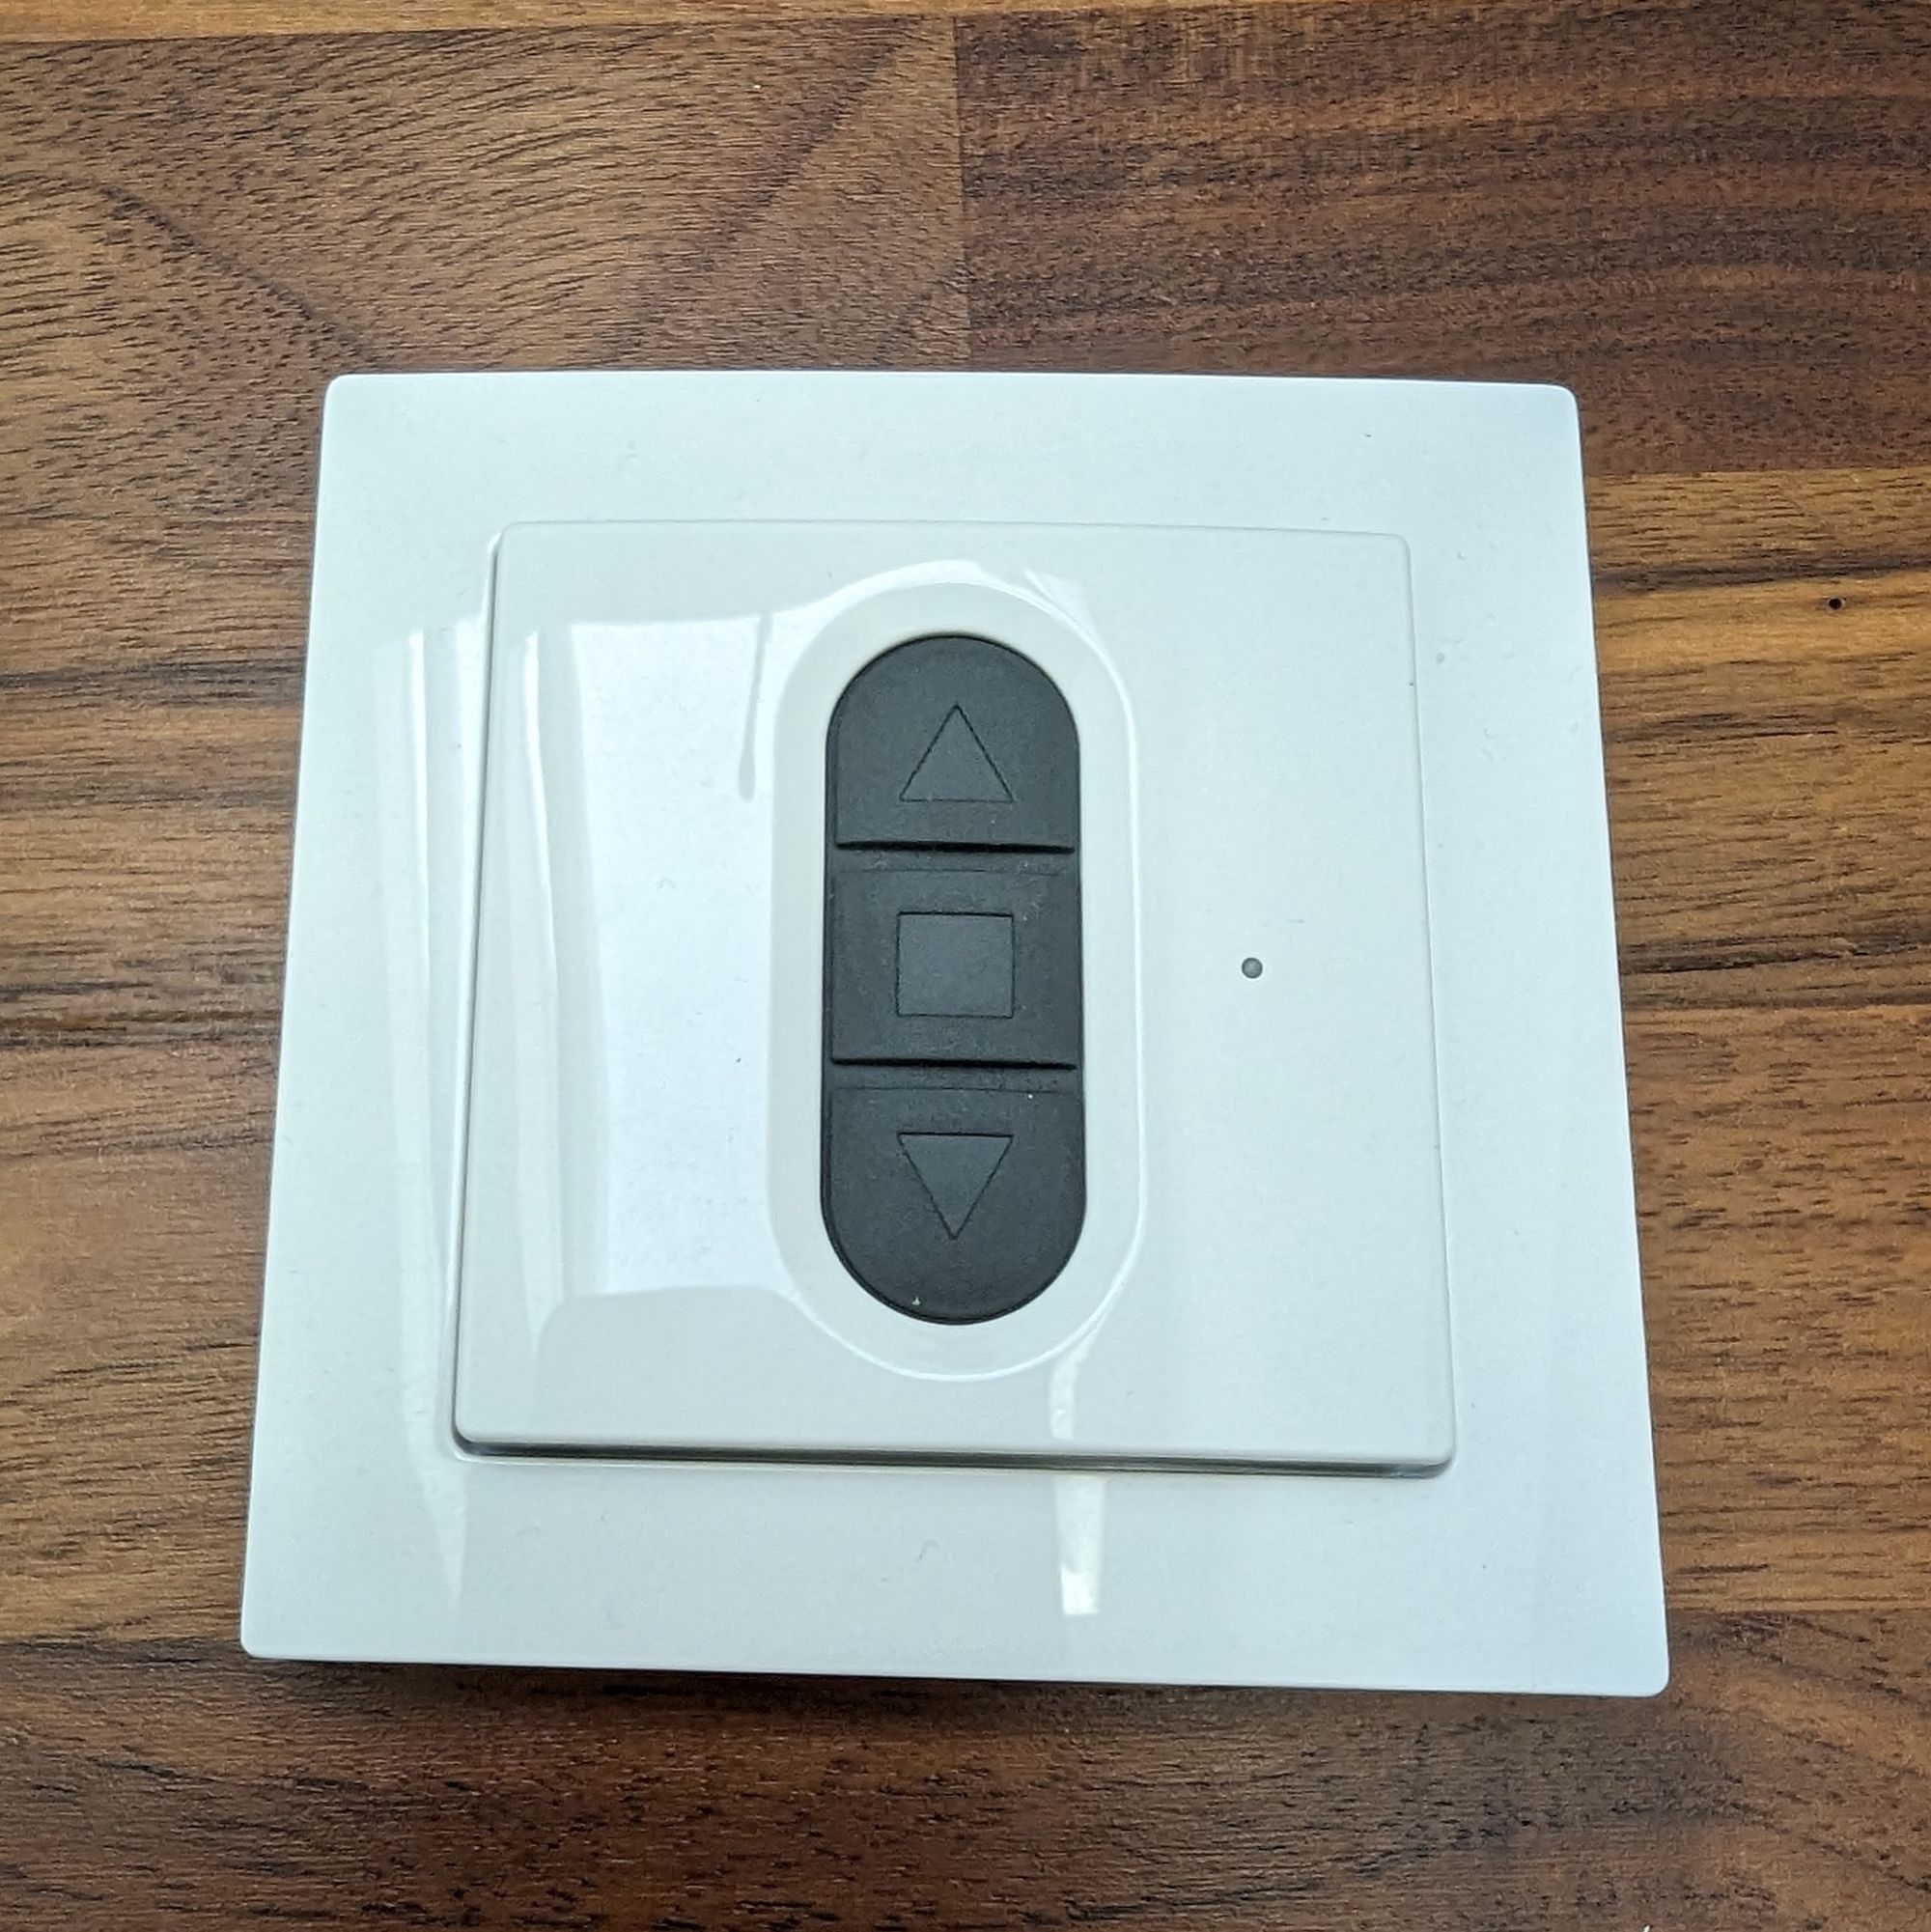 A white wall switch for window covers with 3 buttons. 